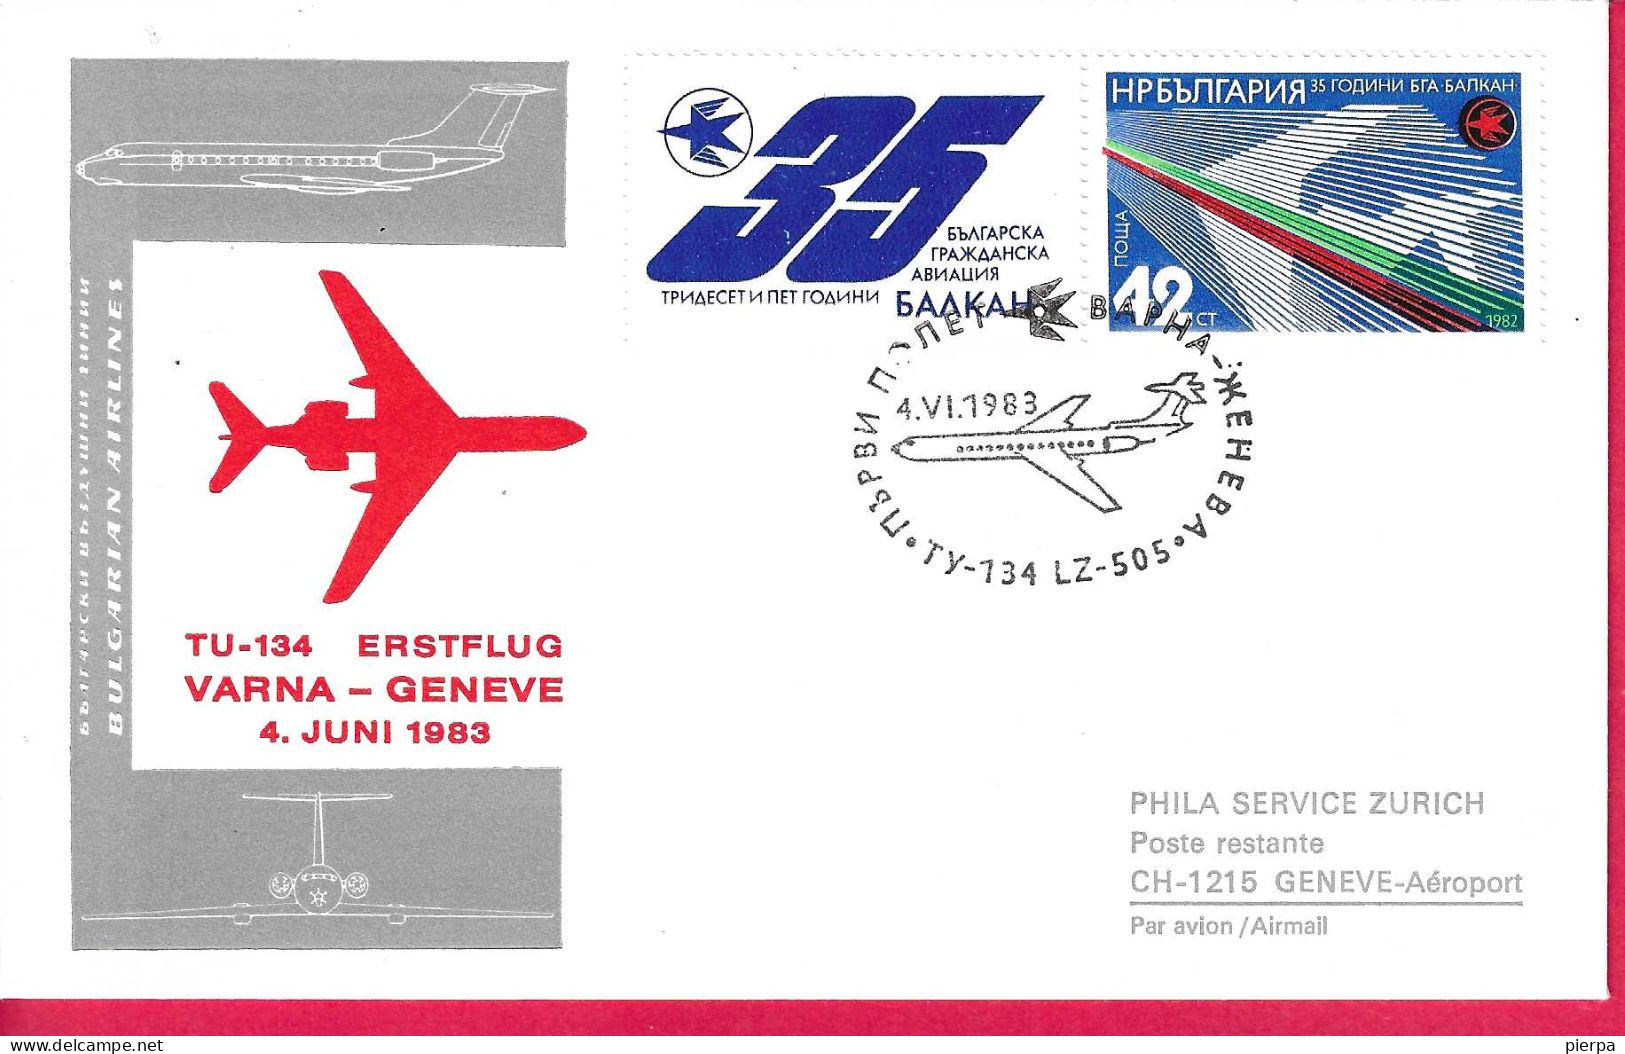 BULGARIA - FIRST FLIGHT TU-134 FROM VARNA TO GENEVE * 4.VI.1983* ON OFFICIAL COVER - Luftpost